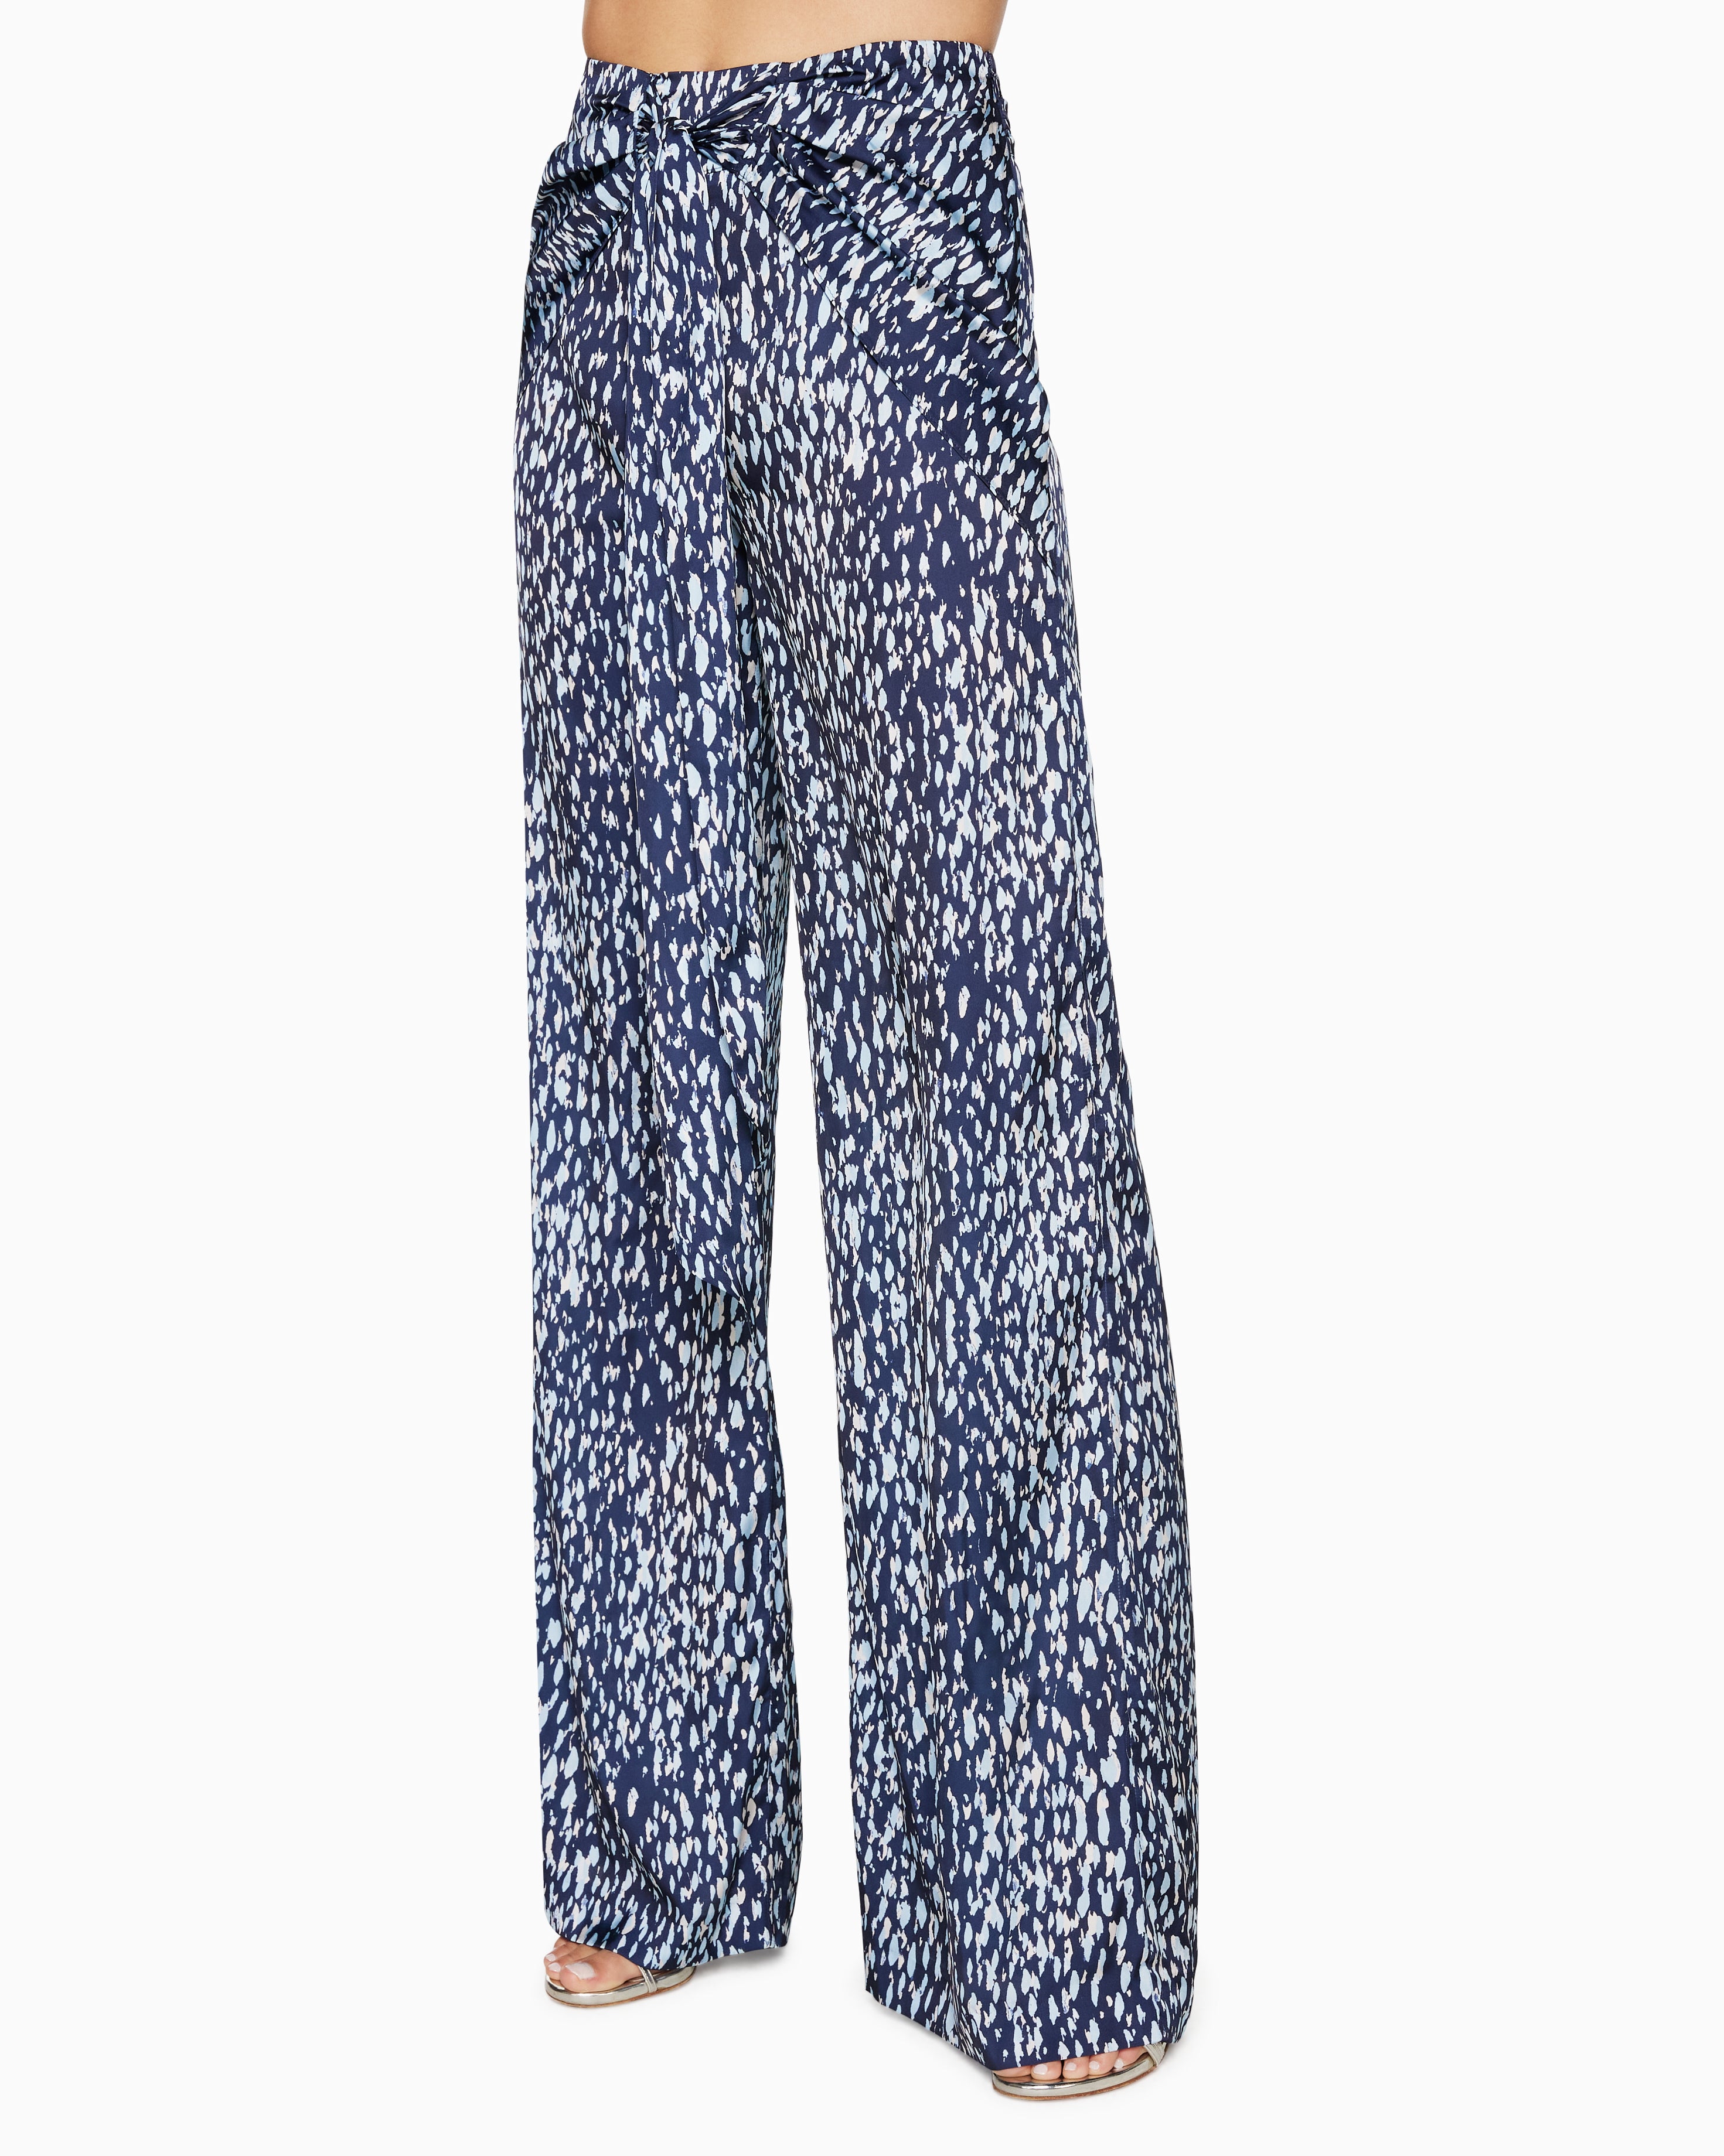  Printed Waverly Wide Leg Pant in Navy Watercolor